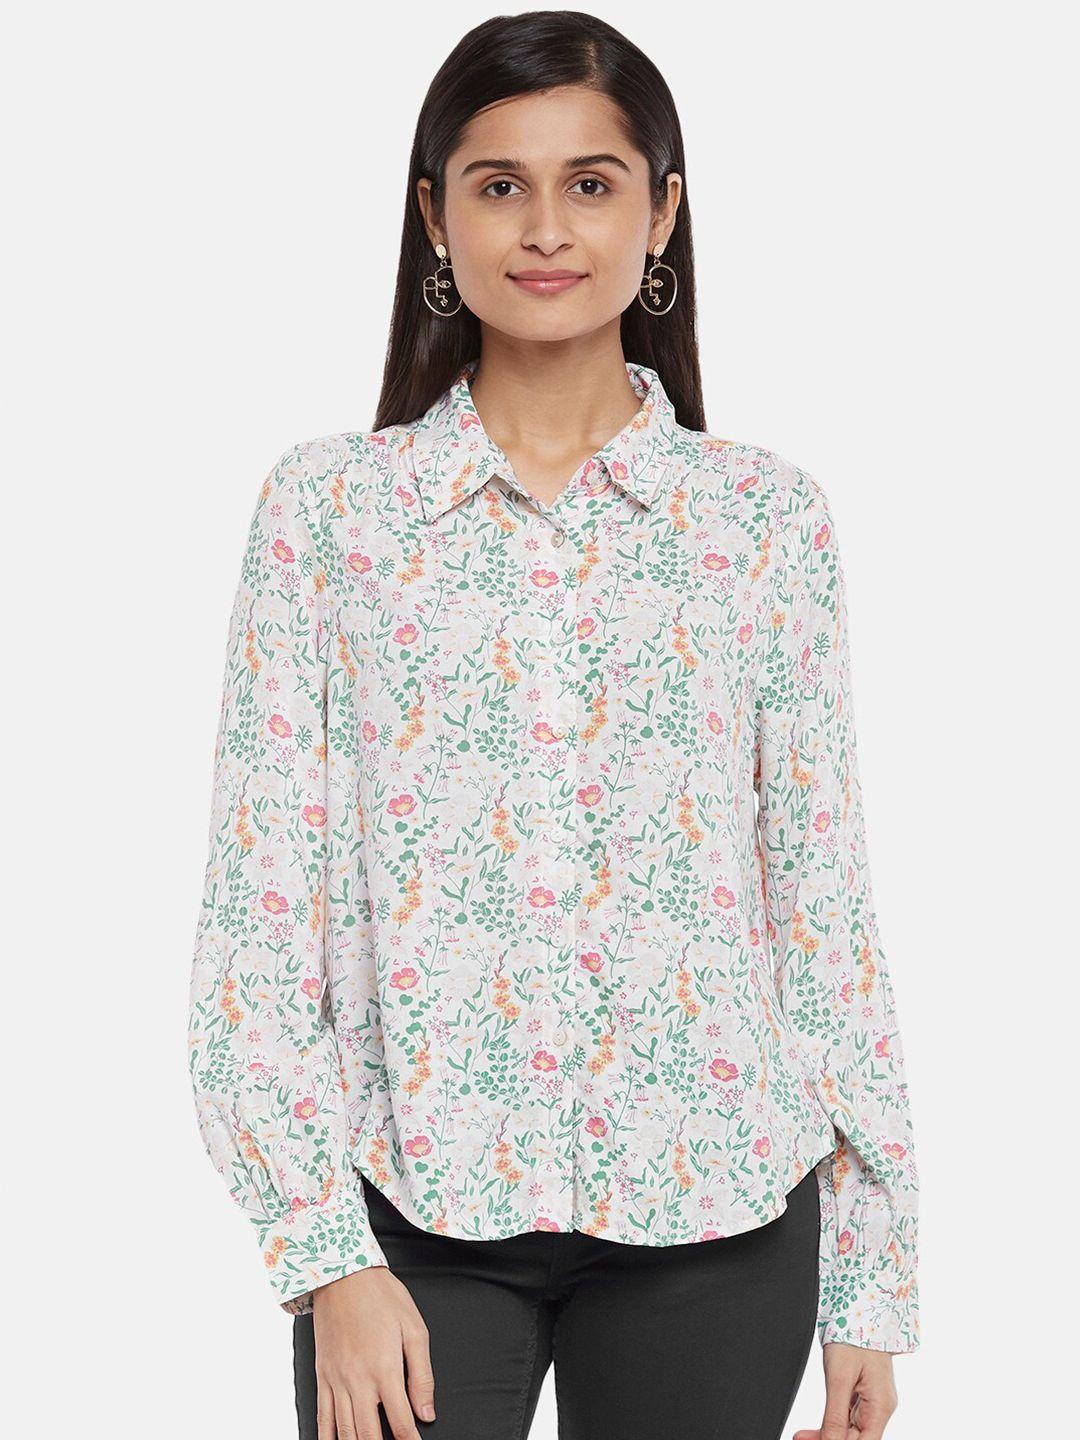 honey by pantaloons wome white floral print shirt style top